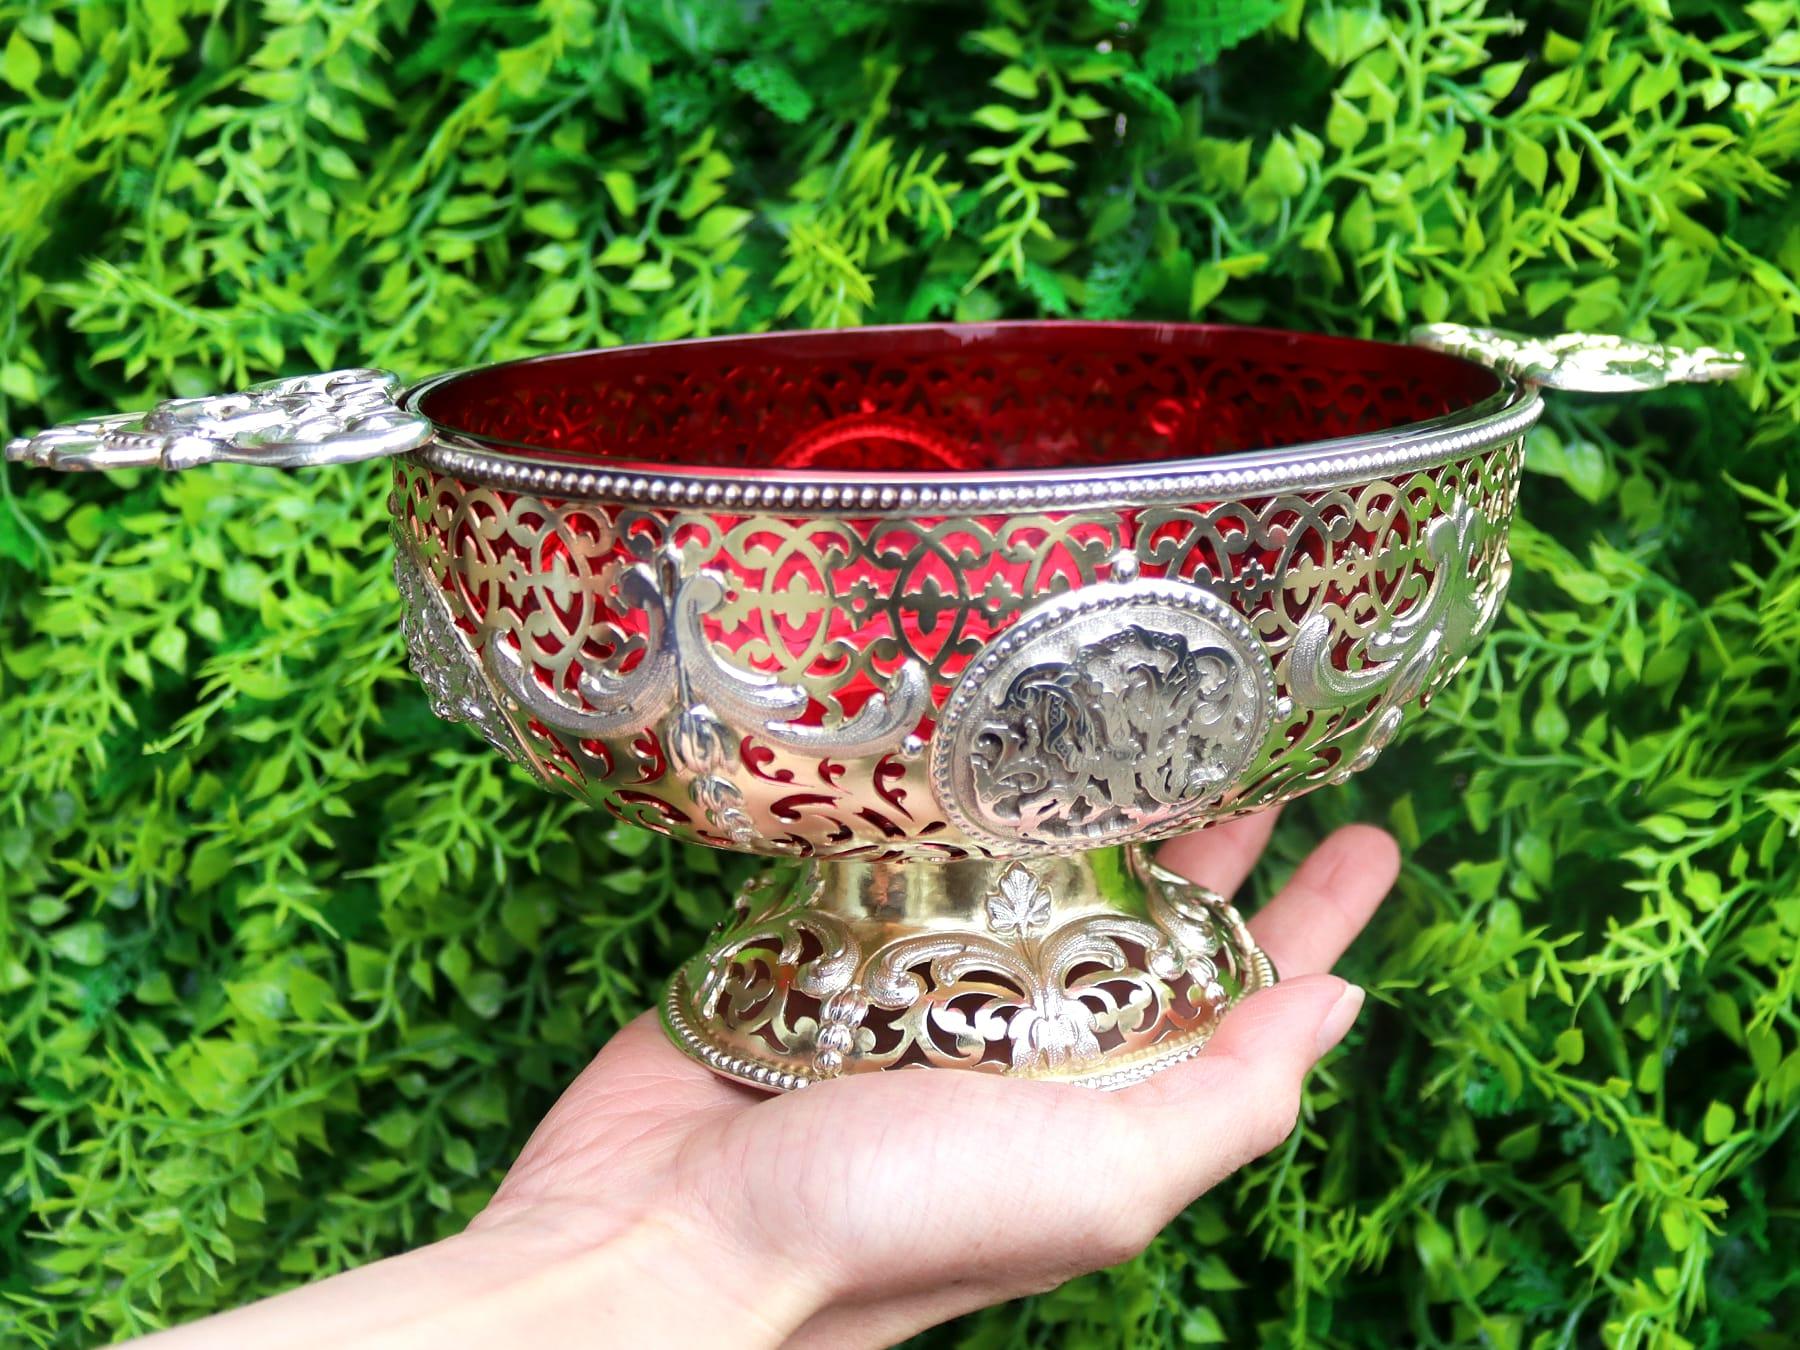 An exceptional, fine and impressive antique Victorian English sterling silver gilt and cranberry glass dish; an addition to our ornamental silverware collection

This exceptional antique Victorian sterling silver dish has an oval form.

The sterling